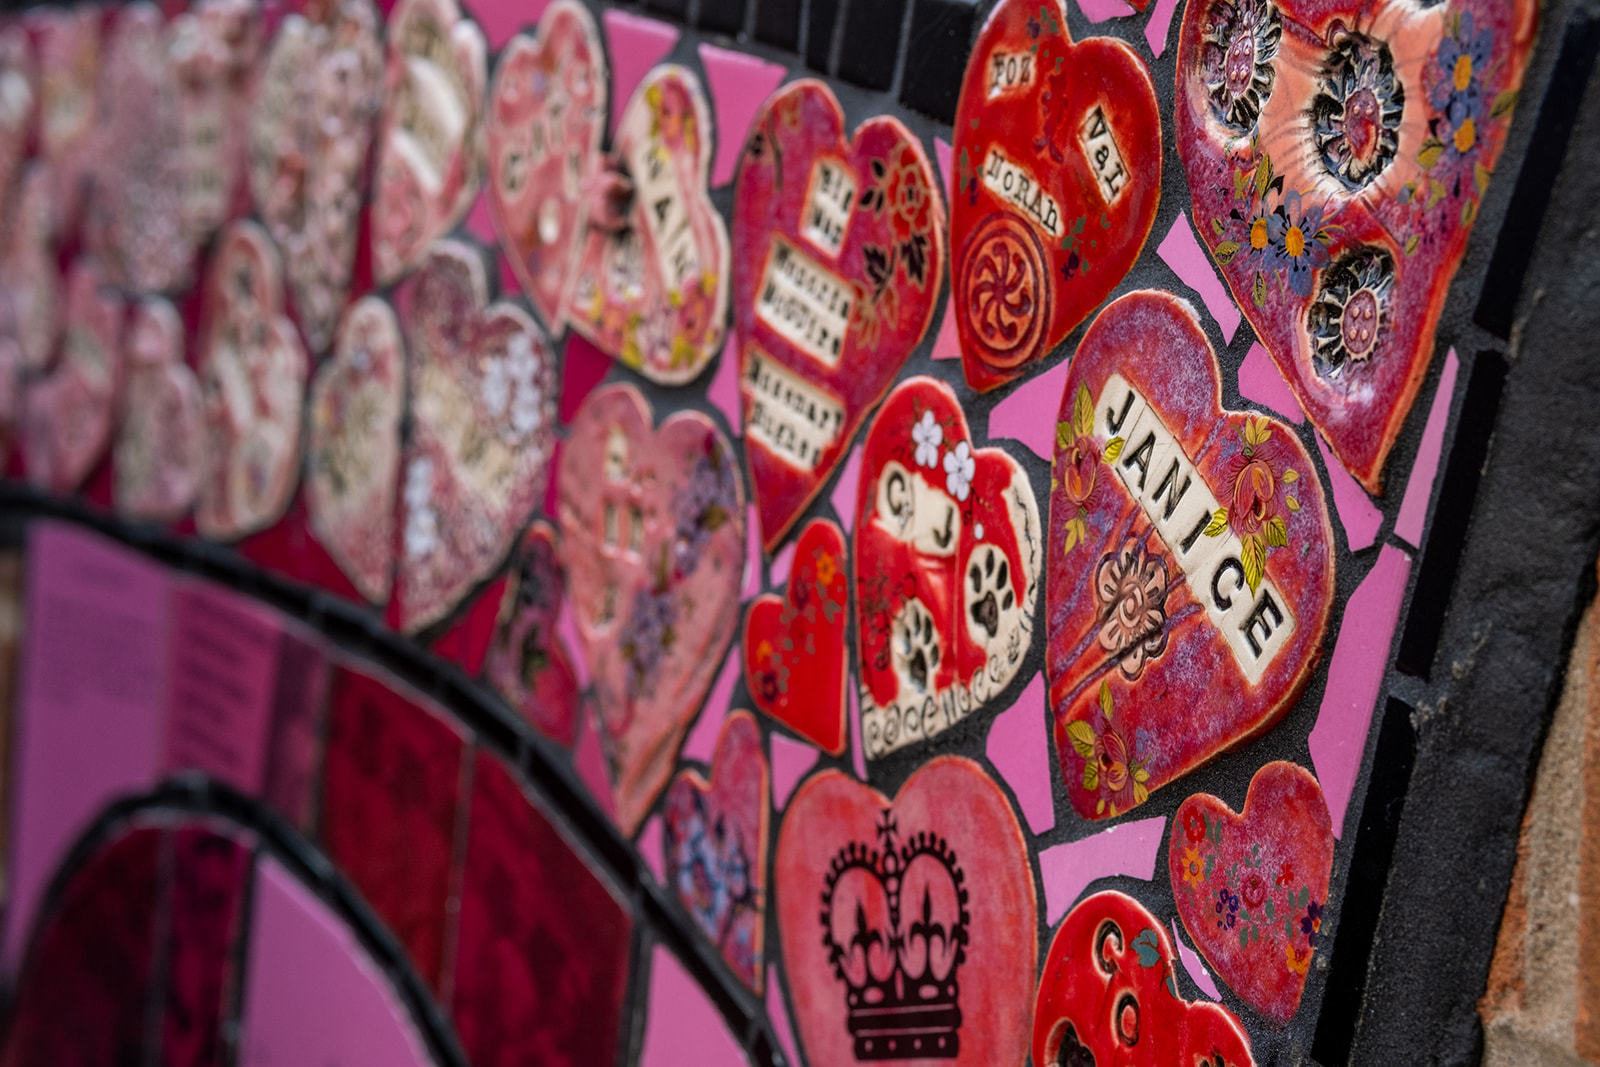 A close up photograph of the Strong Women of St Helens mural, there are clay hearts in different shades of red and dark pink that read 'Janice', 'CJ', and 'Foz, Val, Nora'.